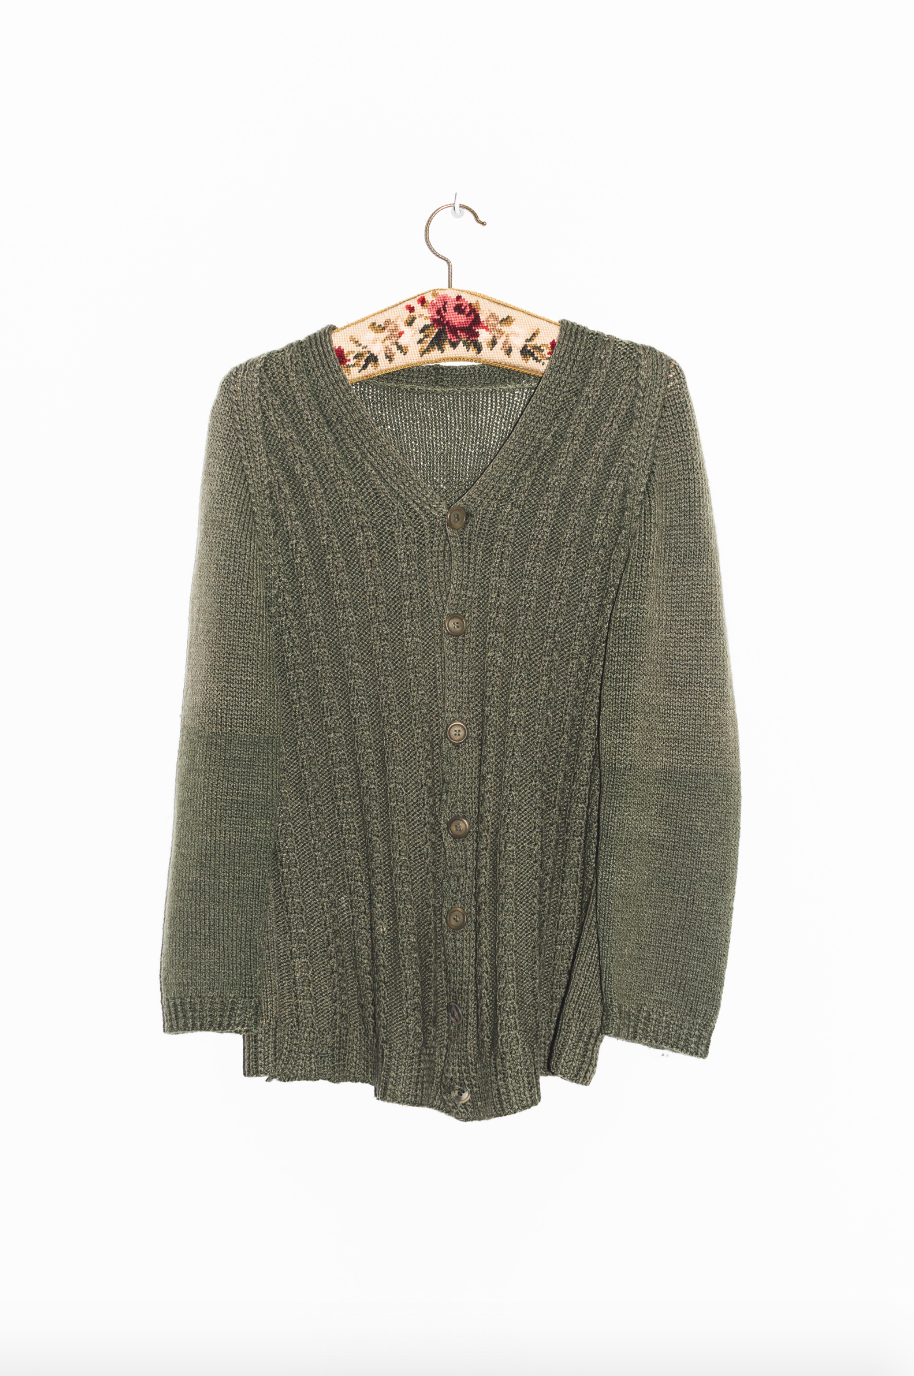 NEW IN! Green knitted vest